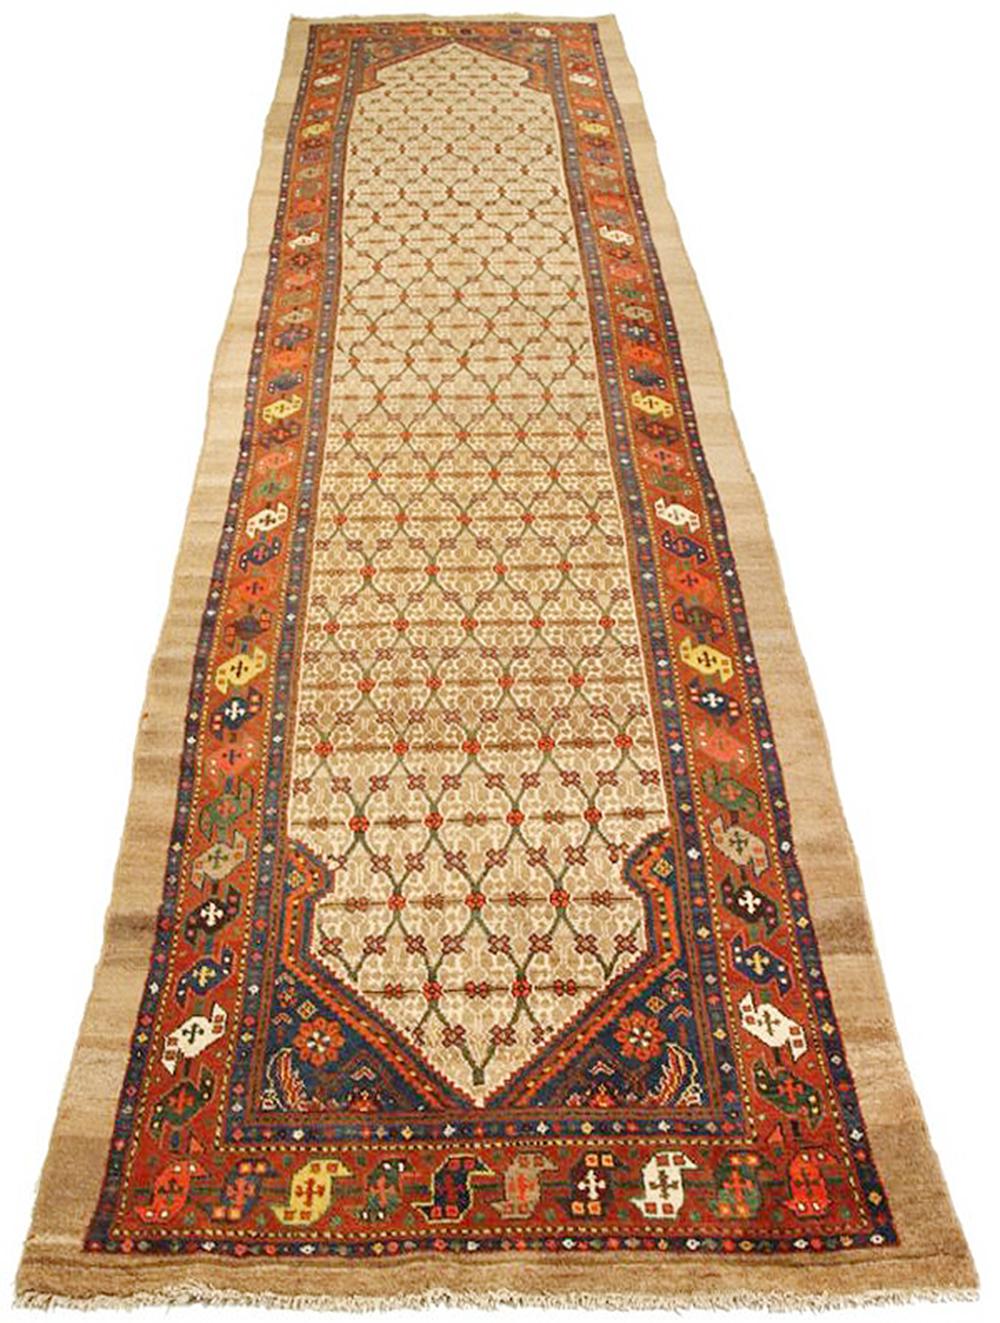 Antique Persian runner rug handwoven from the finest sheep’s wool and colored with all-natural vegetable dyes that are safe for humans and pets. It’s a traditional Sarab design featuring geometric details in red and brown over white and beige field.